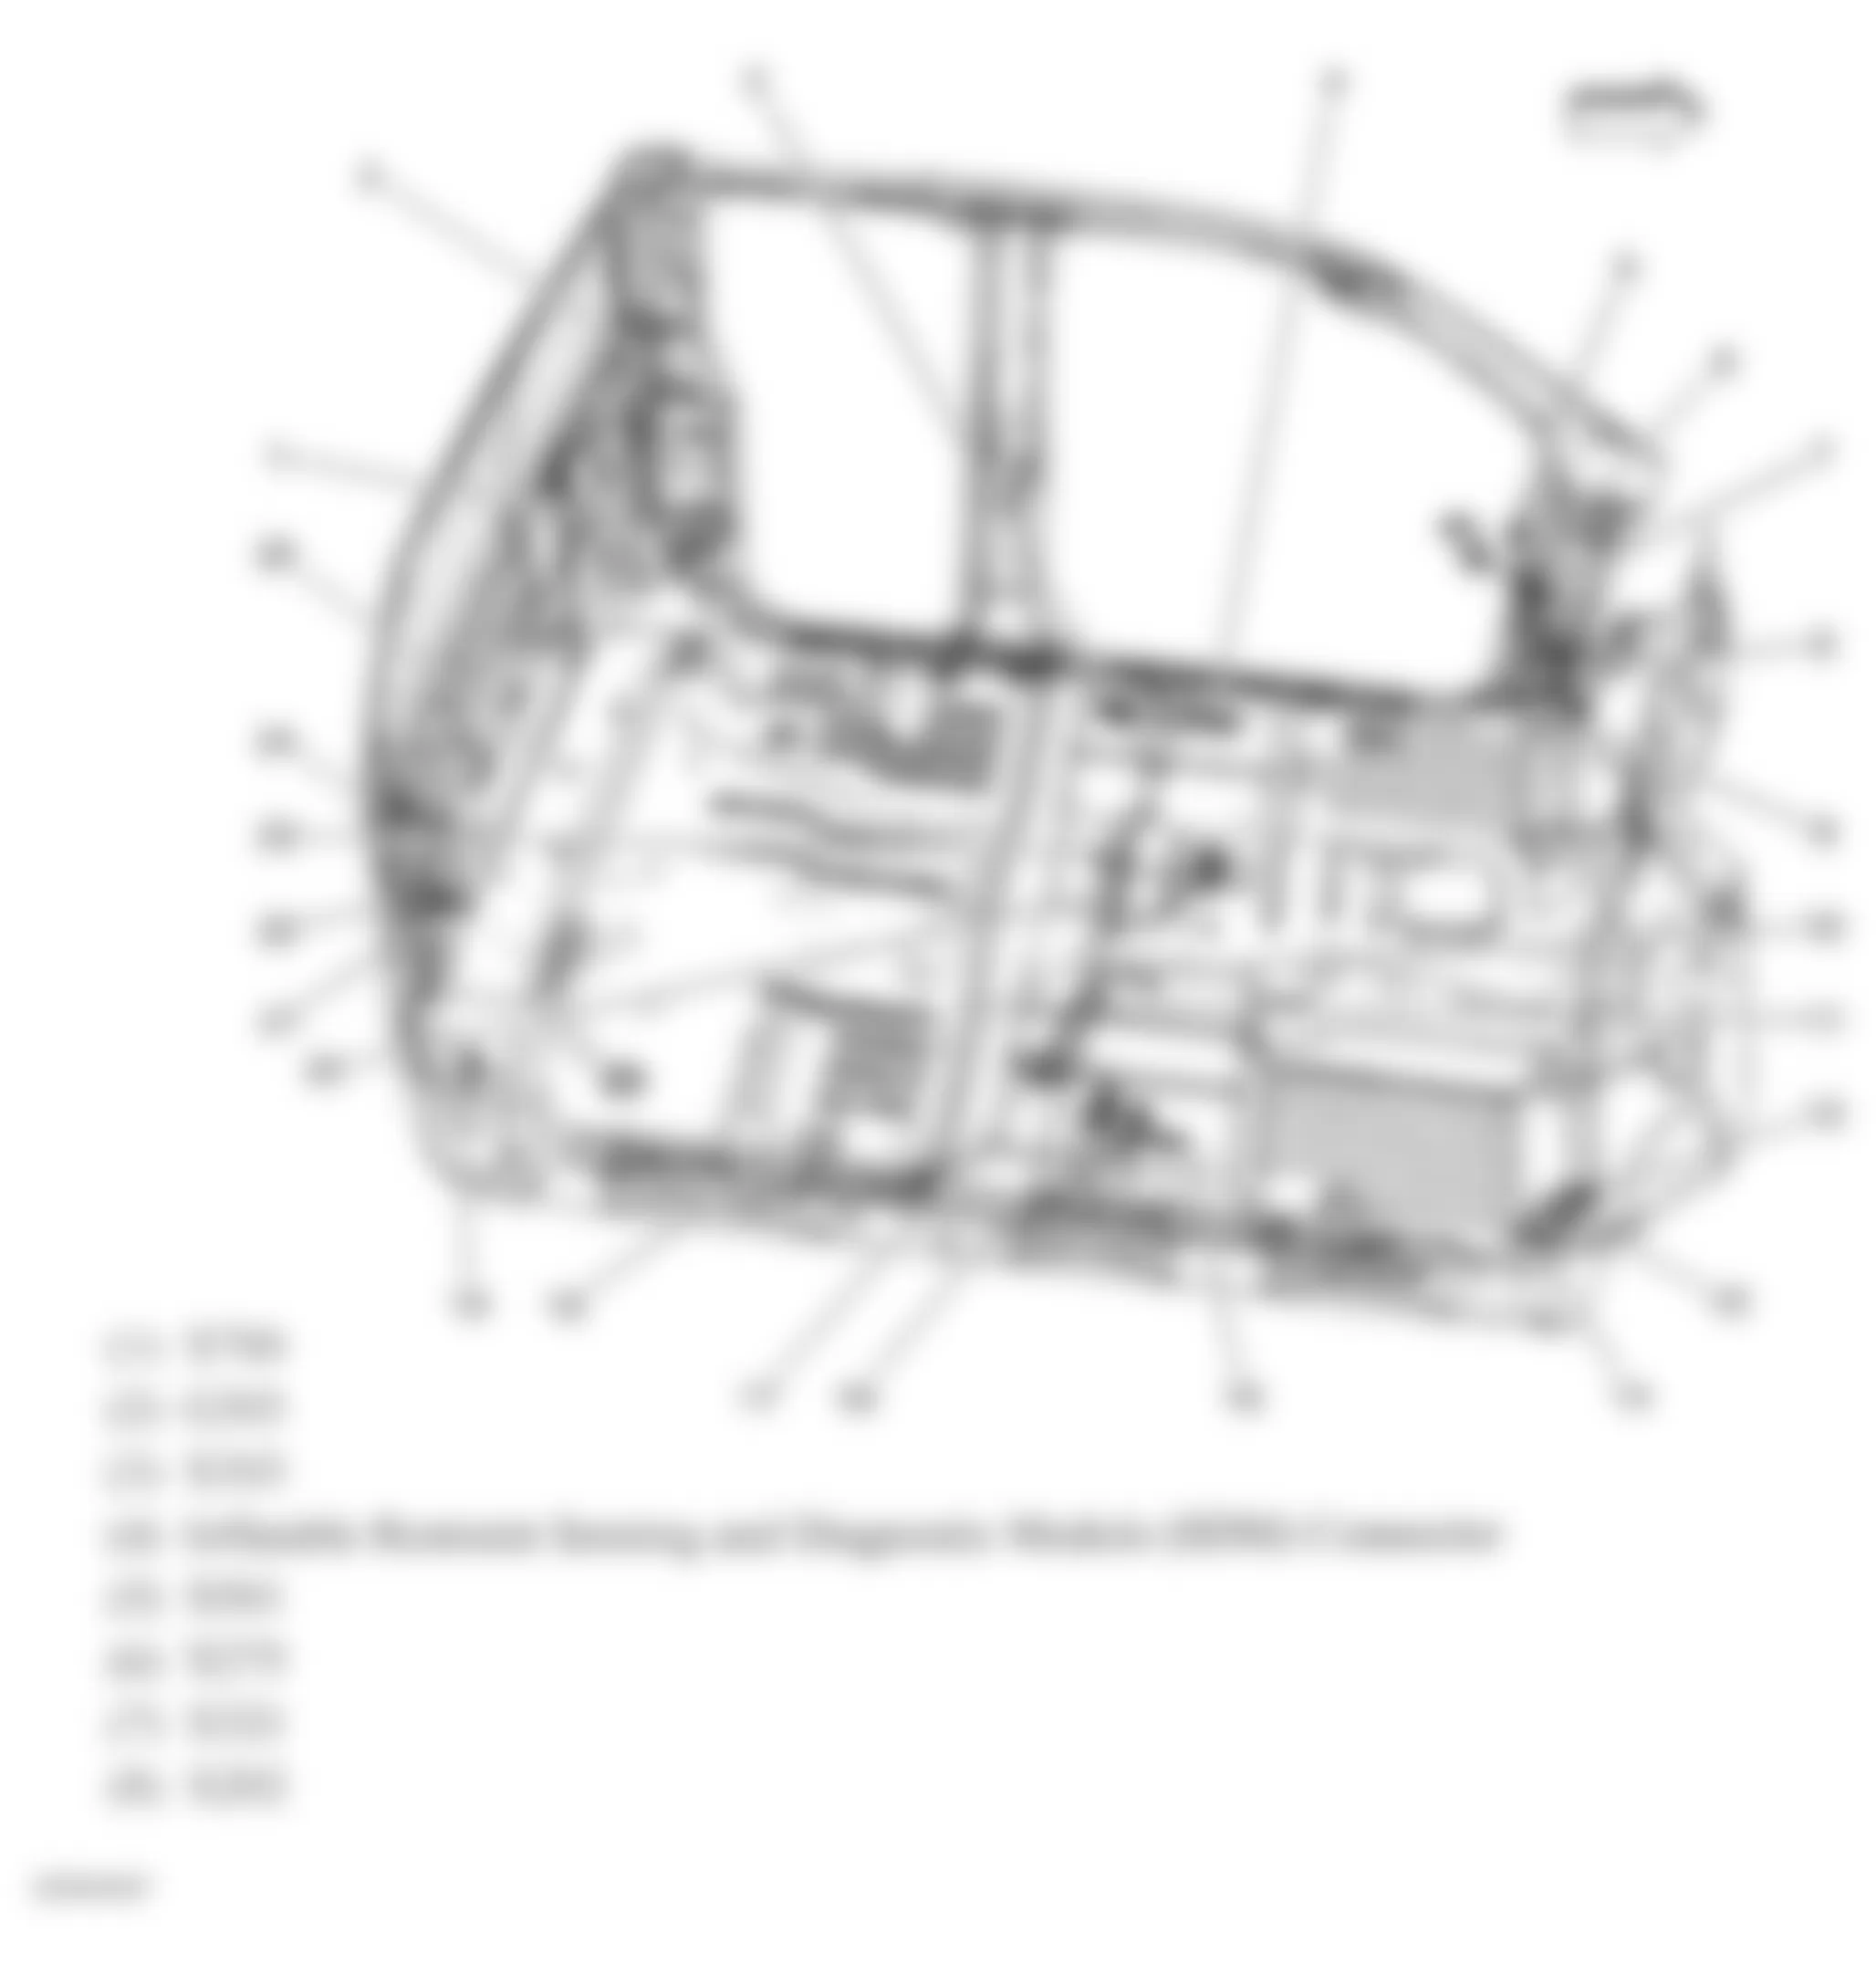 Chevrolet Silverado 3500 HD 2010 - Component Locations -  Passenger Compartment (Extended Cab) (1 Of 2)